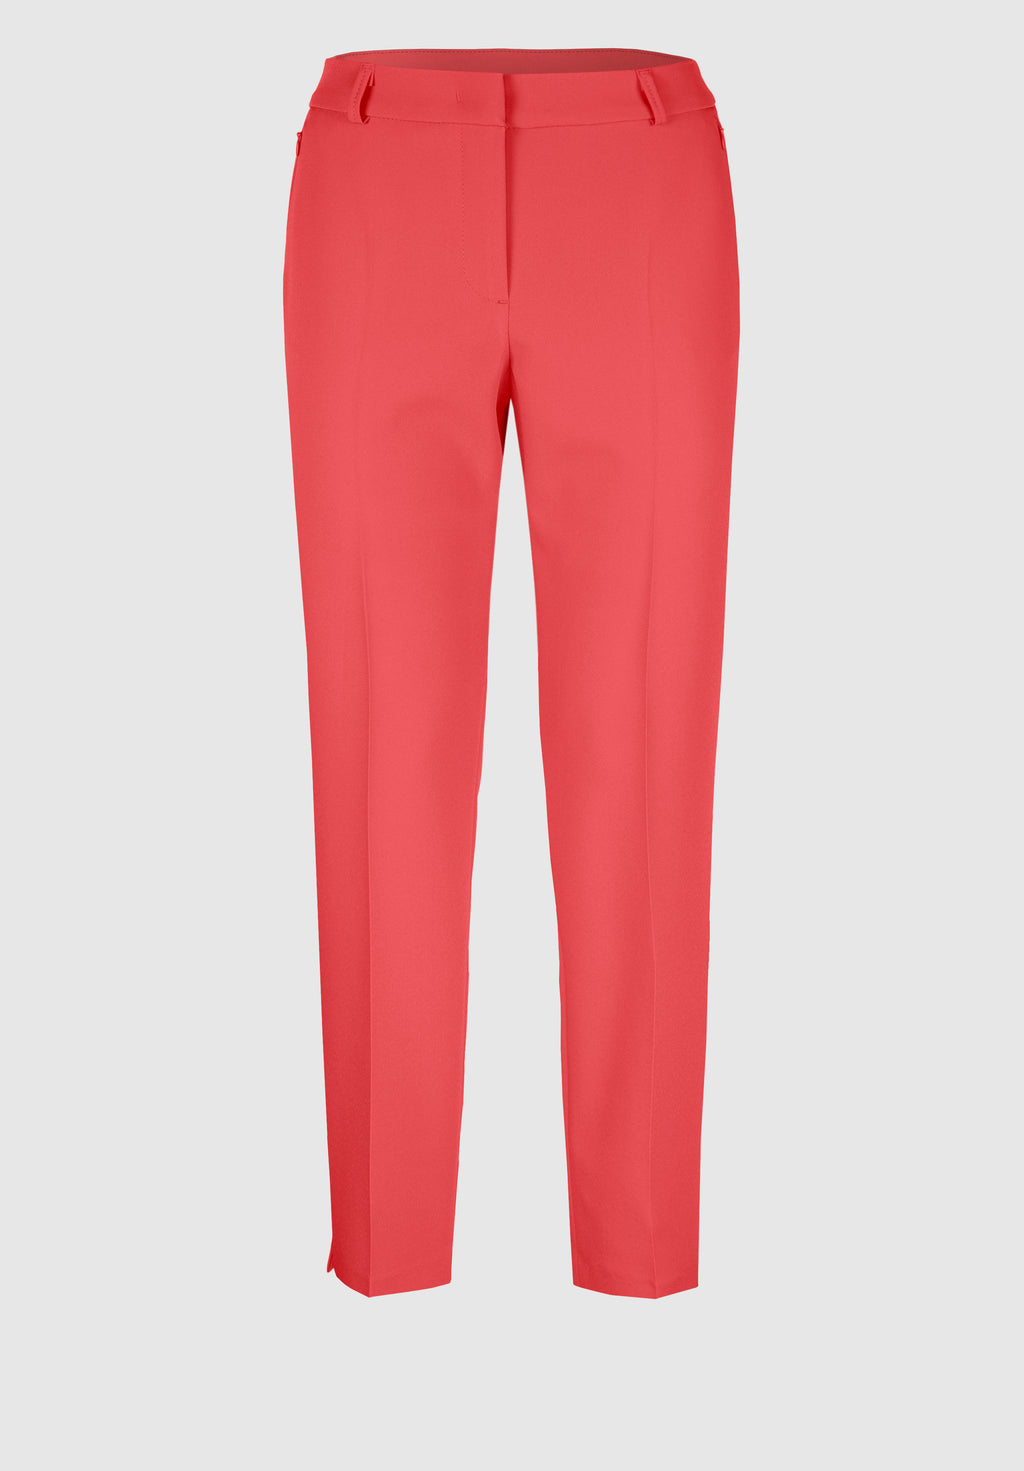 <p>Bianca Siena tailored trousers in coral</p>
<p>Product code 30018</p>